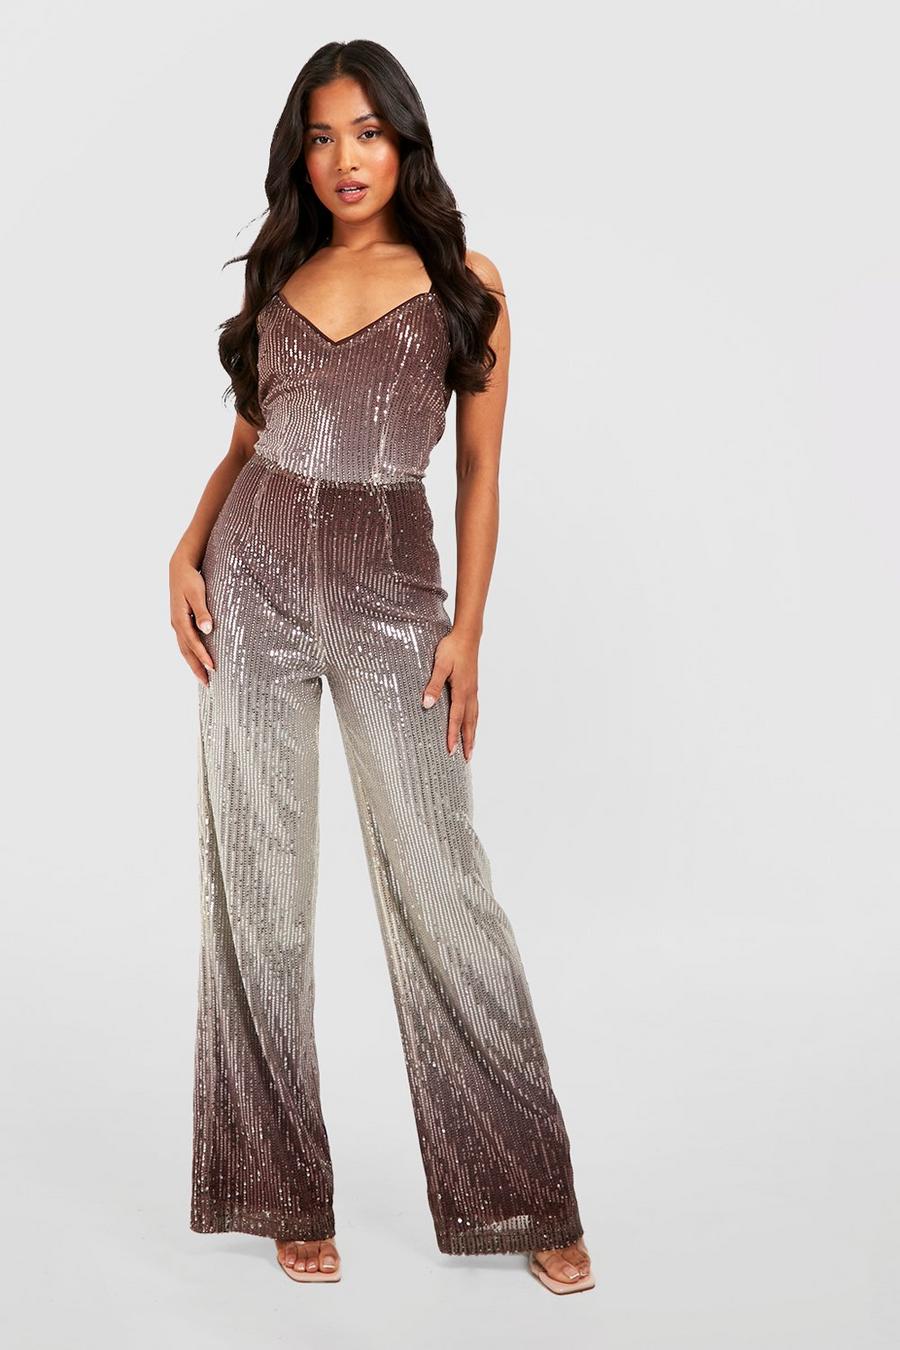 Chocolate Petite Flared Ombre Jumpsuit